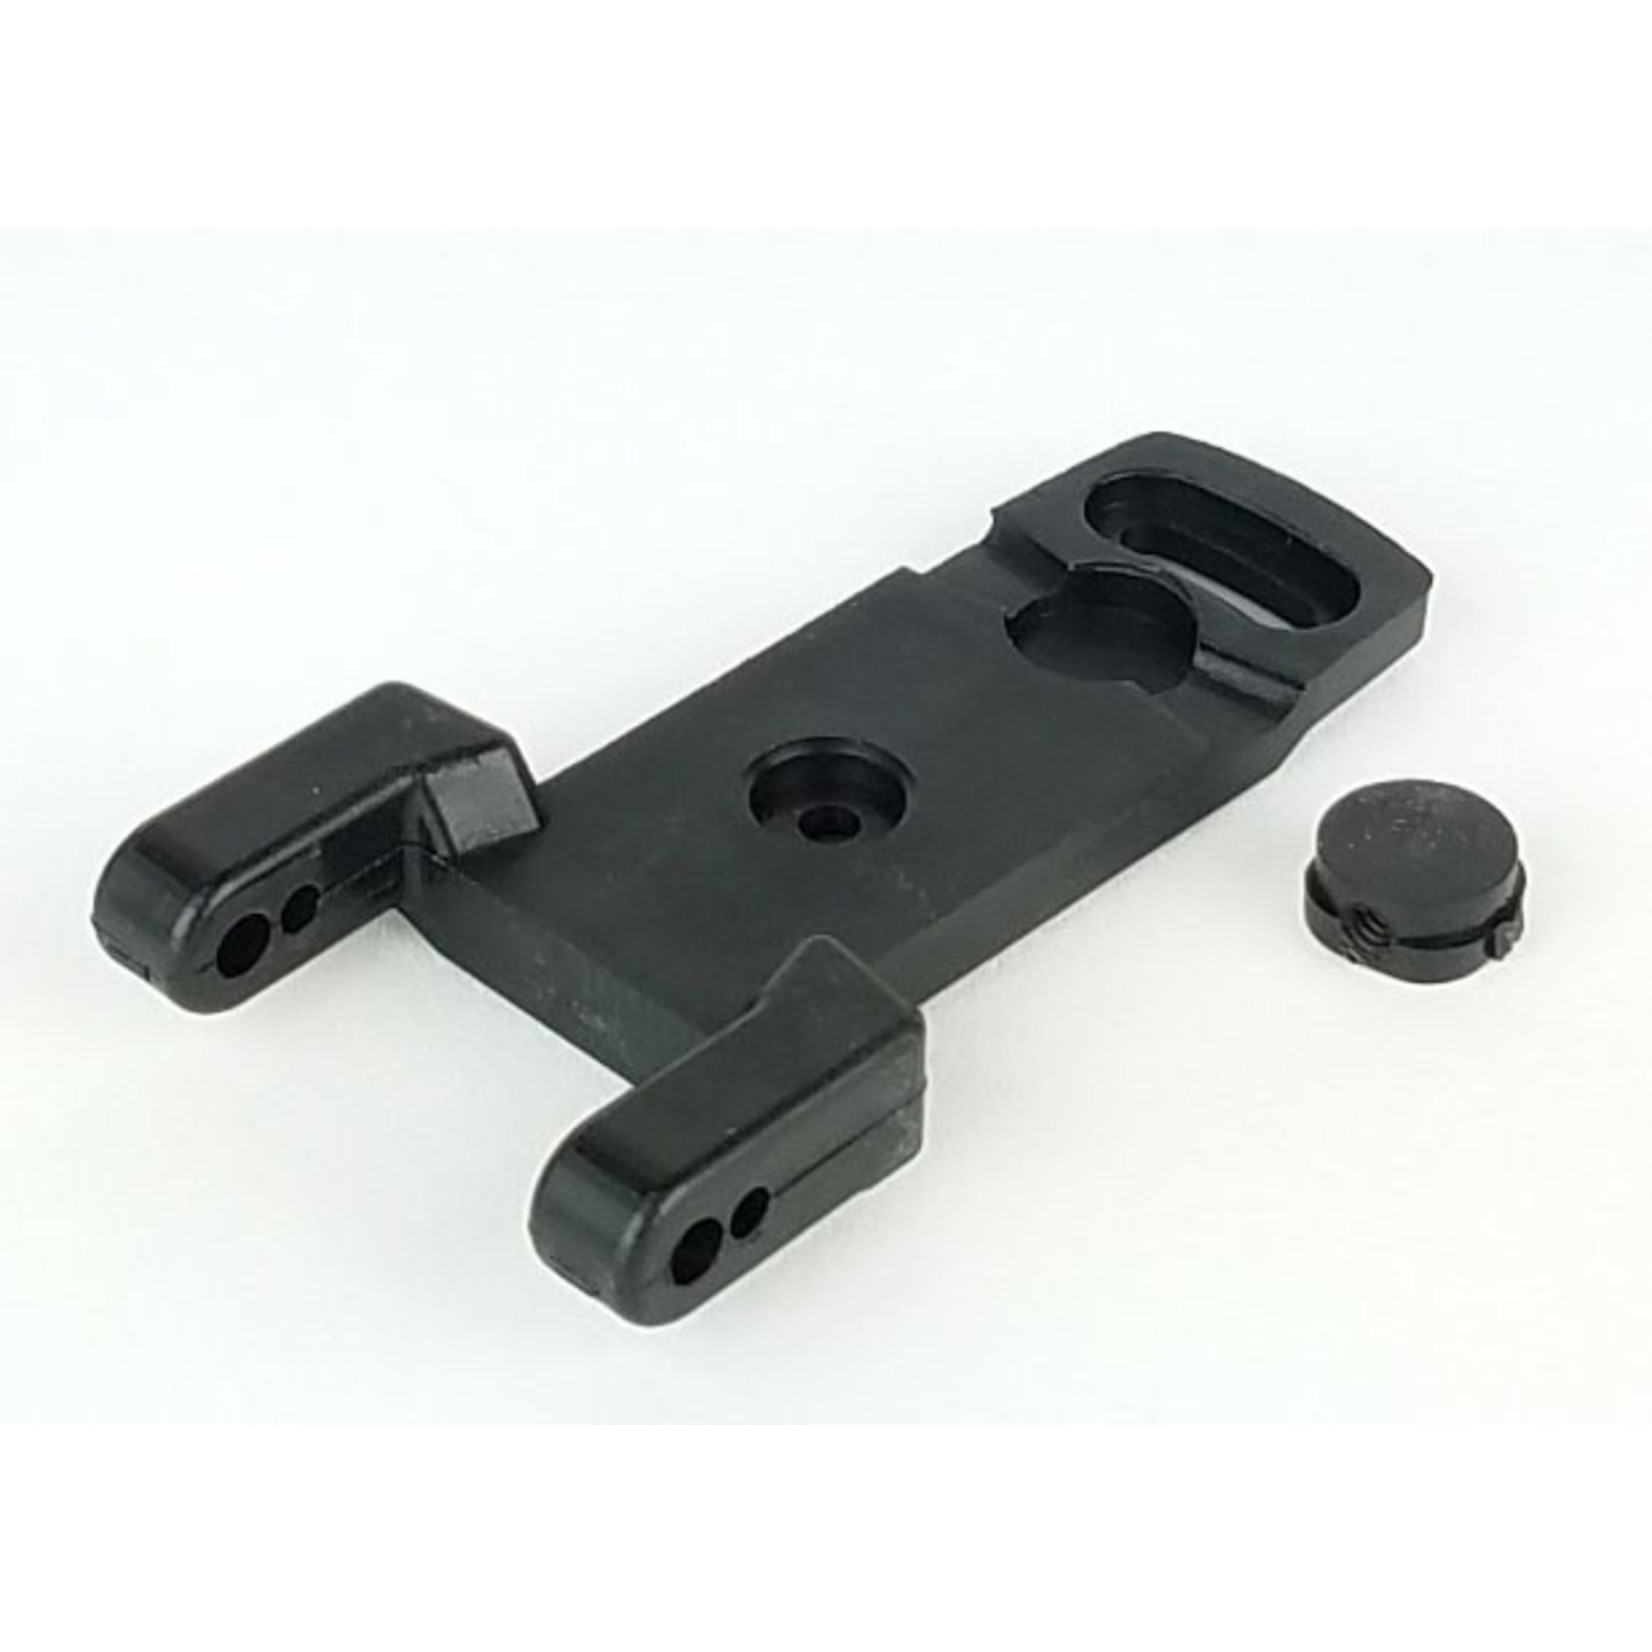 Custom Works RC Products CW3279 Custom Works Outer Pivot Arm for B6.1